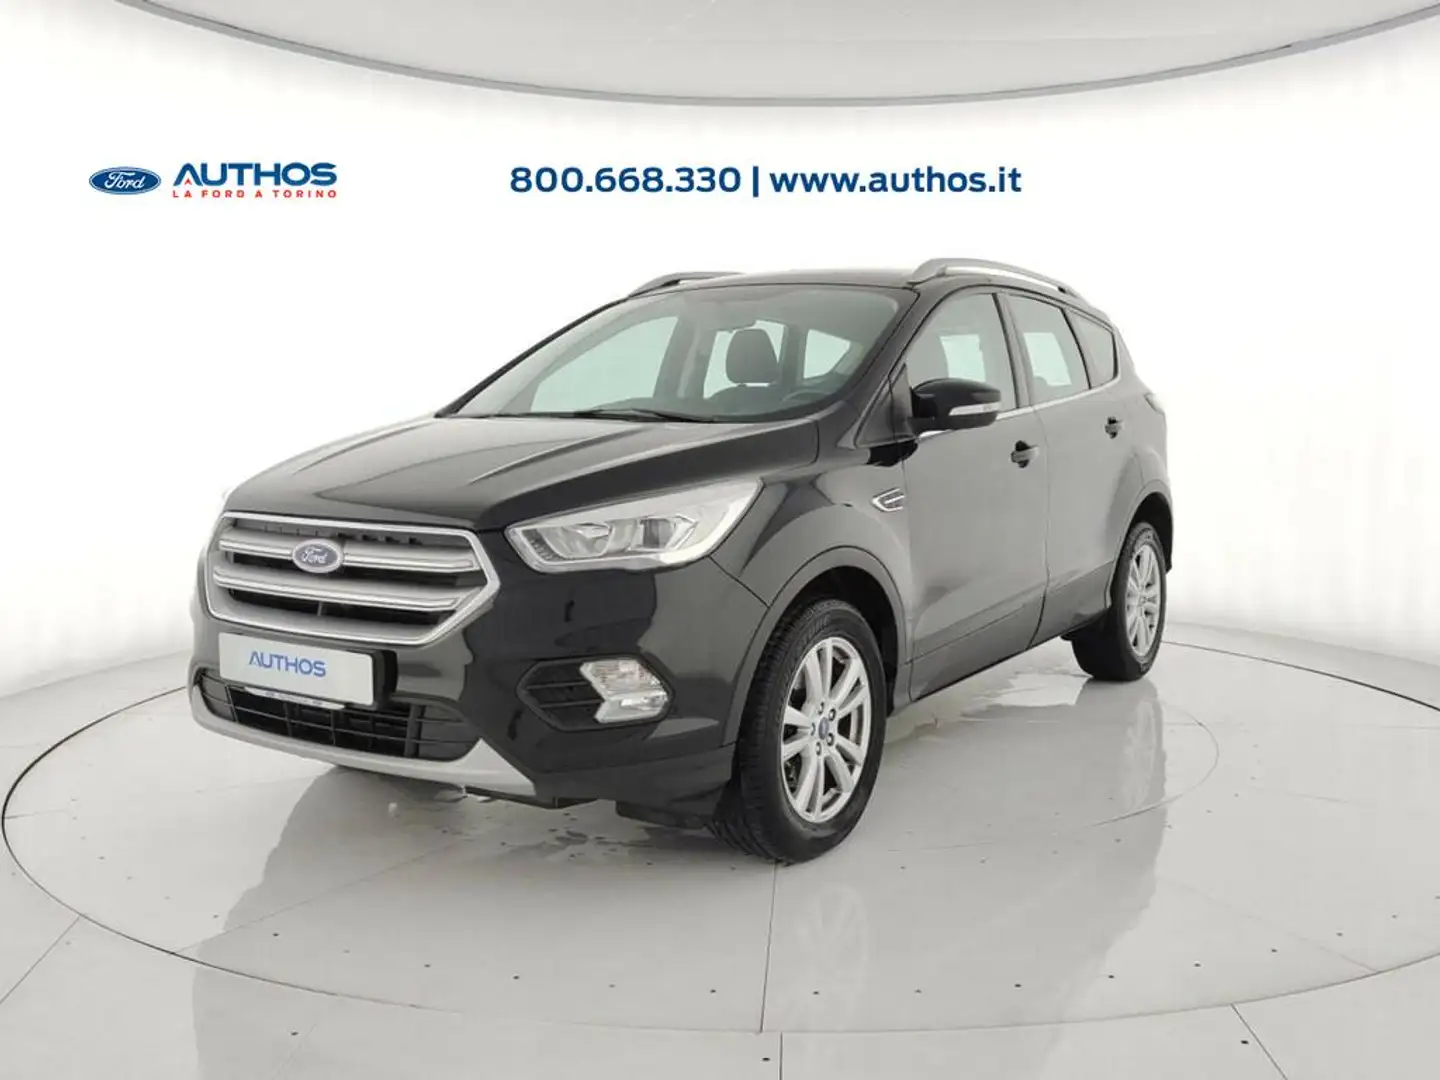 Ford Kuga 2.0 tdci Business s&s 2wd 120cv crna - 1